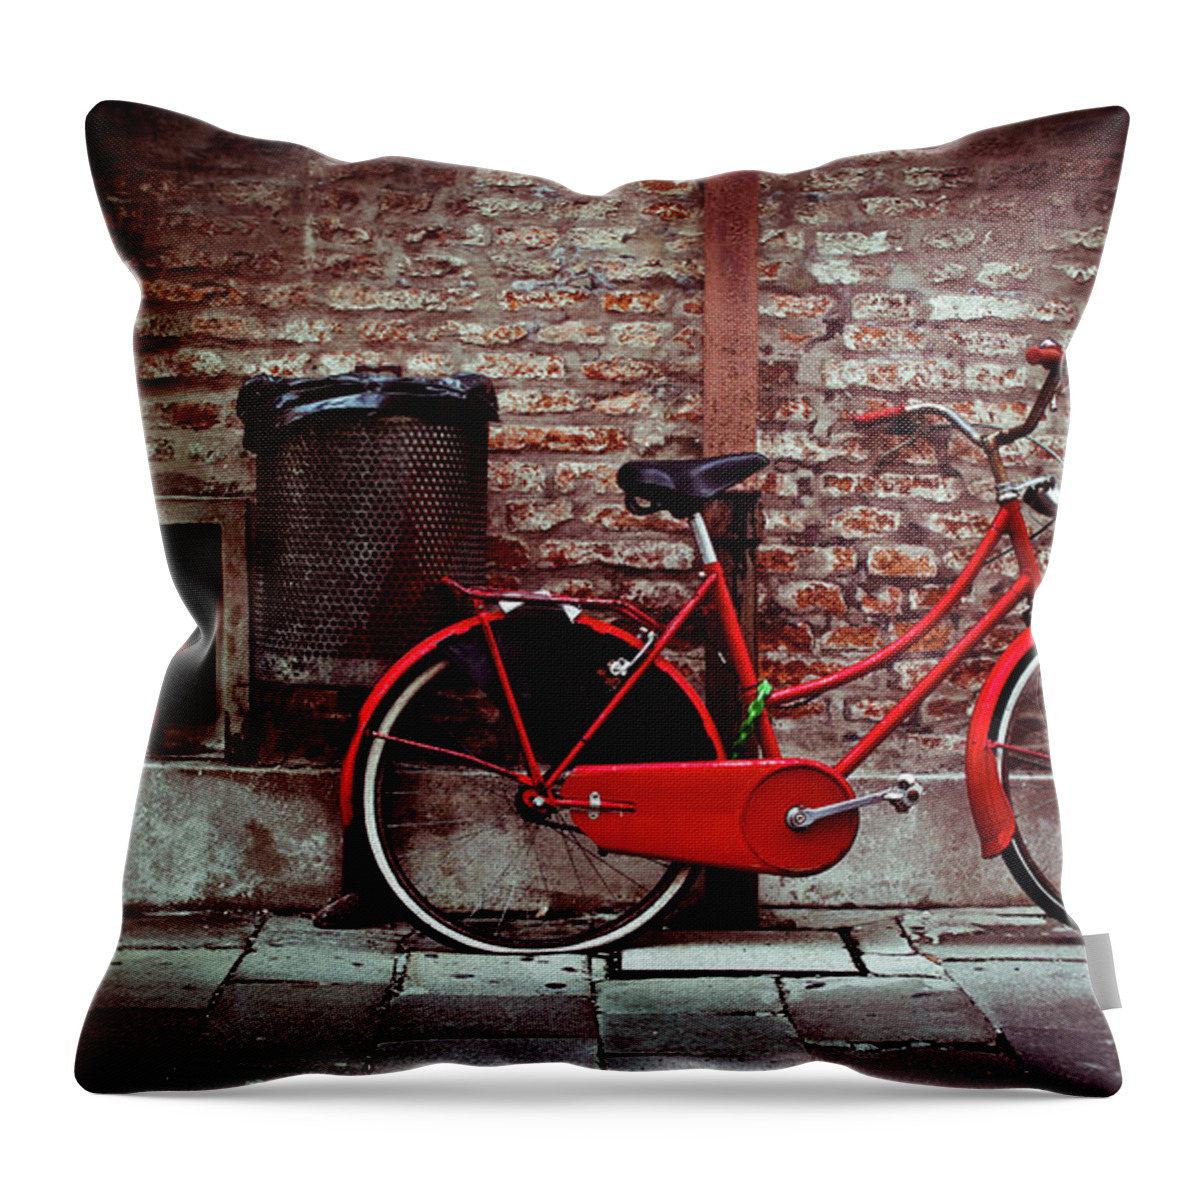 Damaged Throw Pillow featuring the photograph Vintage Bicycle Leaning Against Brick by Moreiso